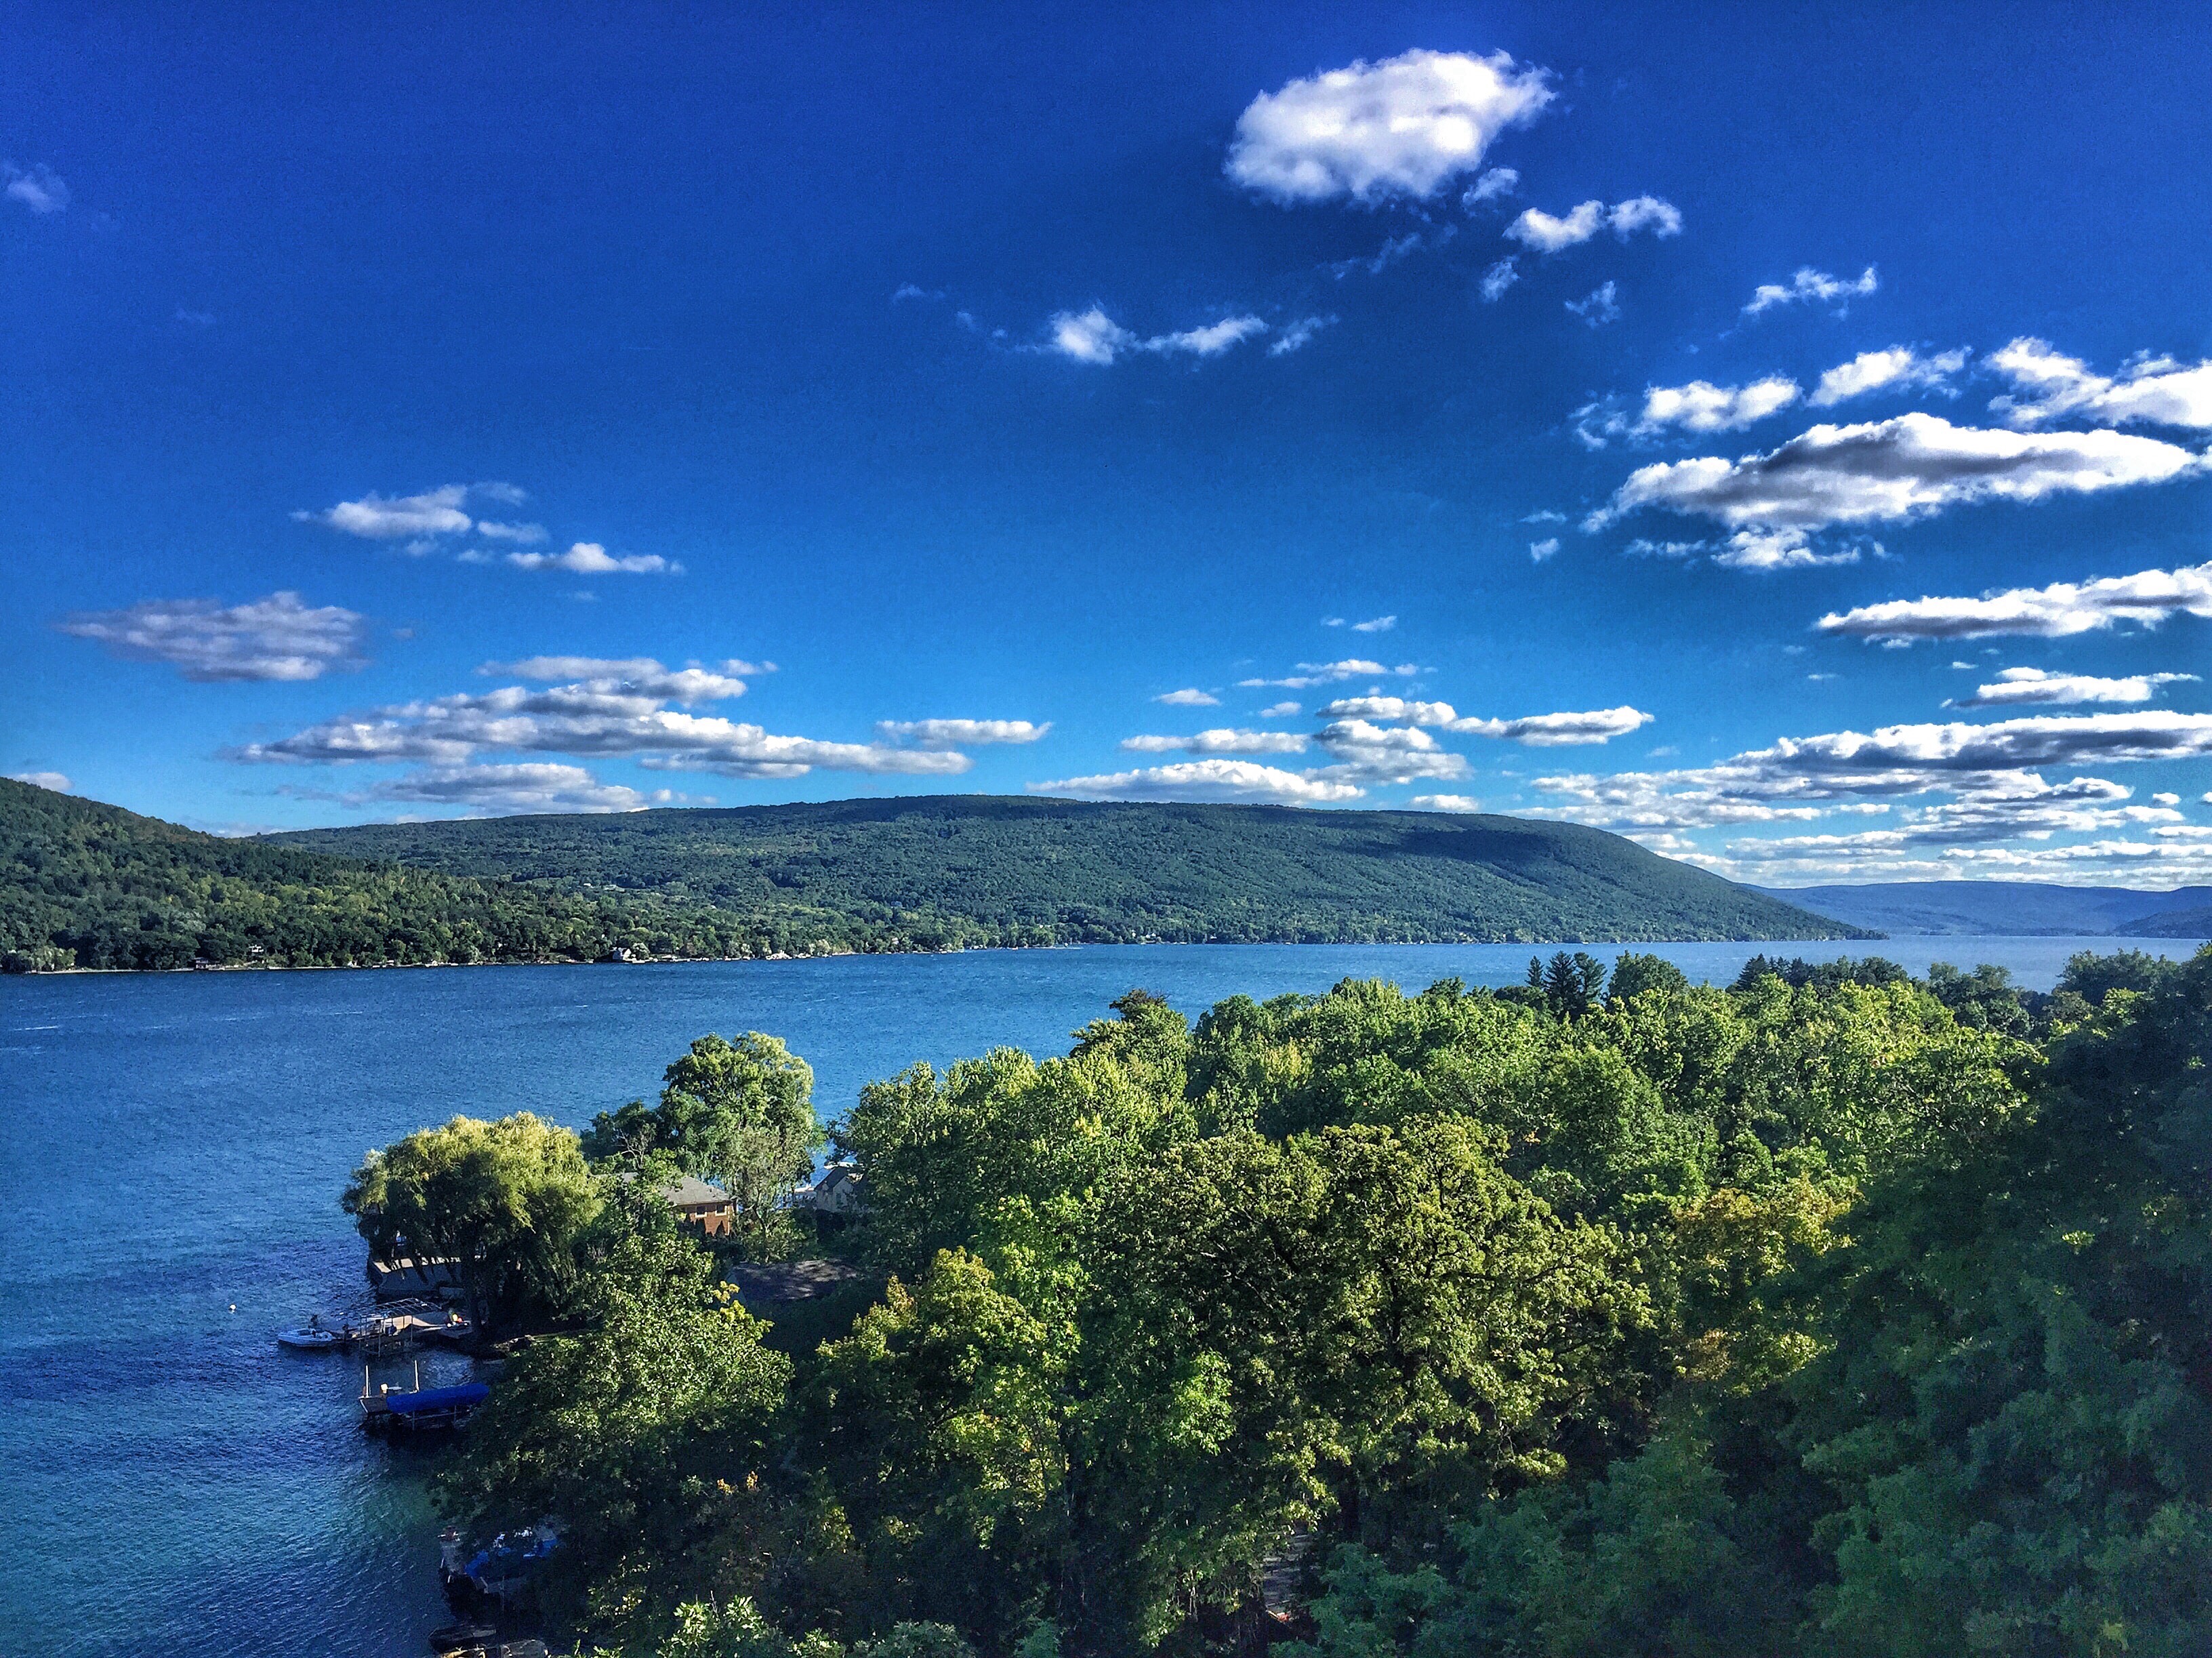 Explore the wineries and lakes of New York's Finger Lakes region, an easy weekend trip from New York City.